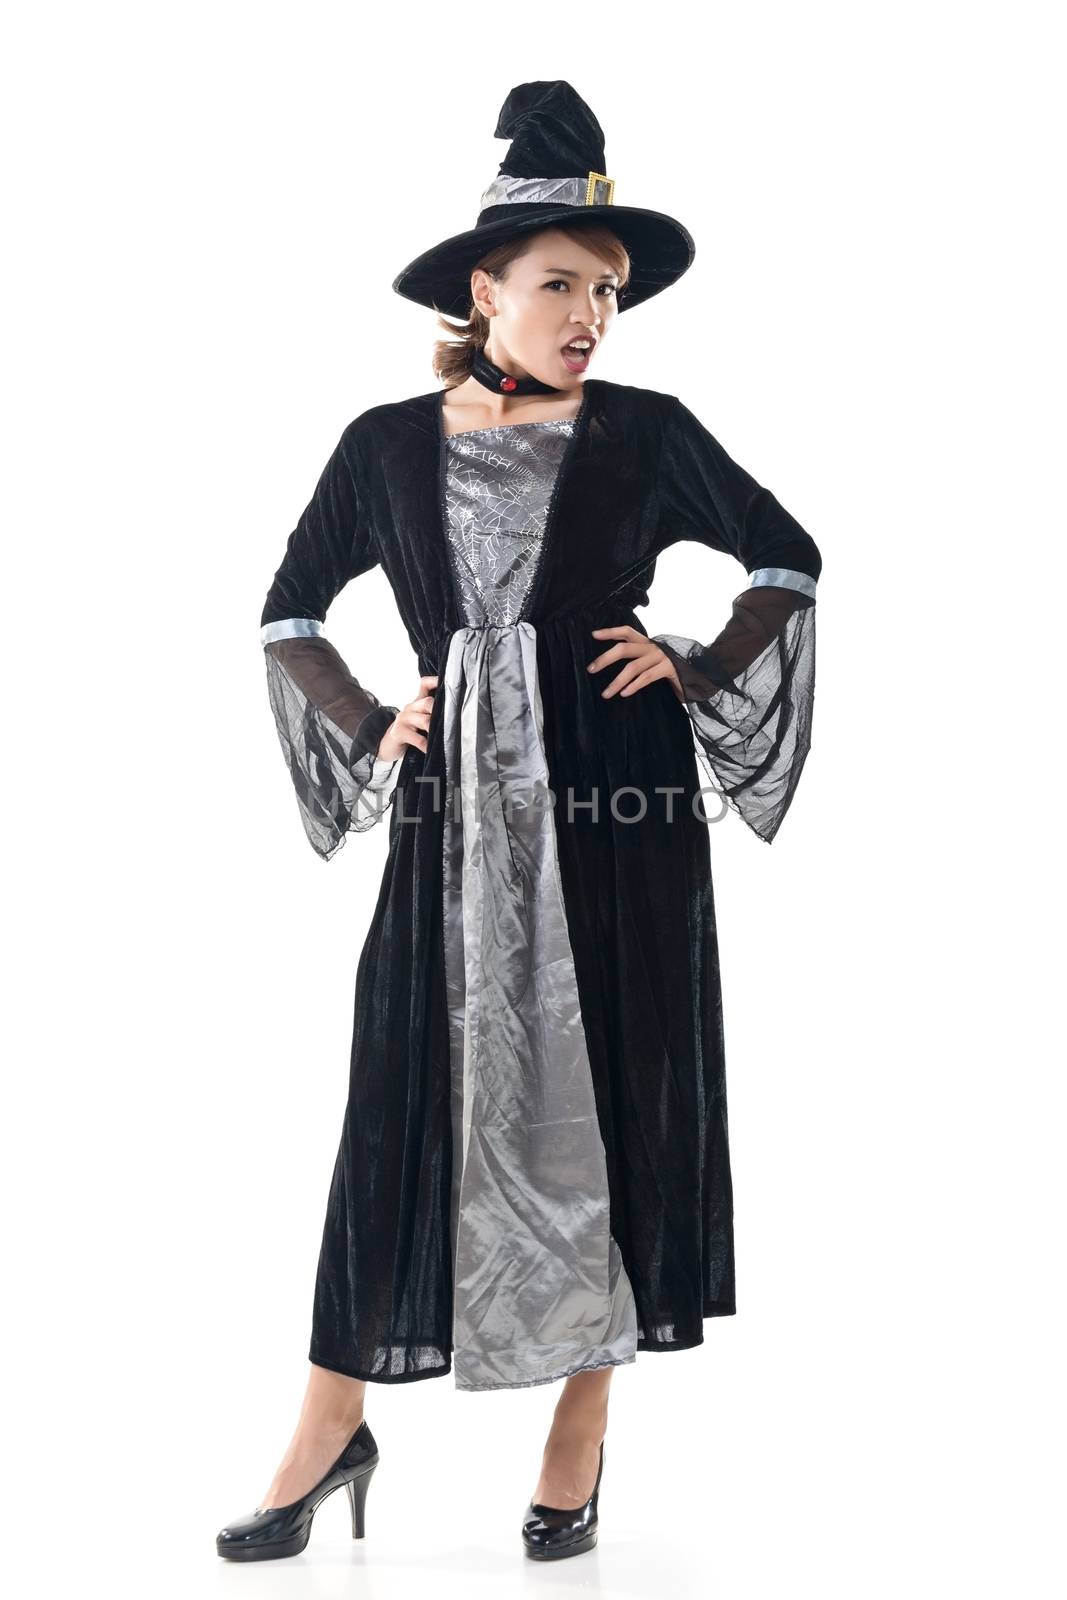 Asian witch woman, full length portrait isolated on white.